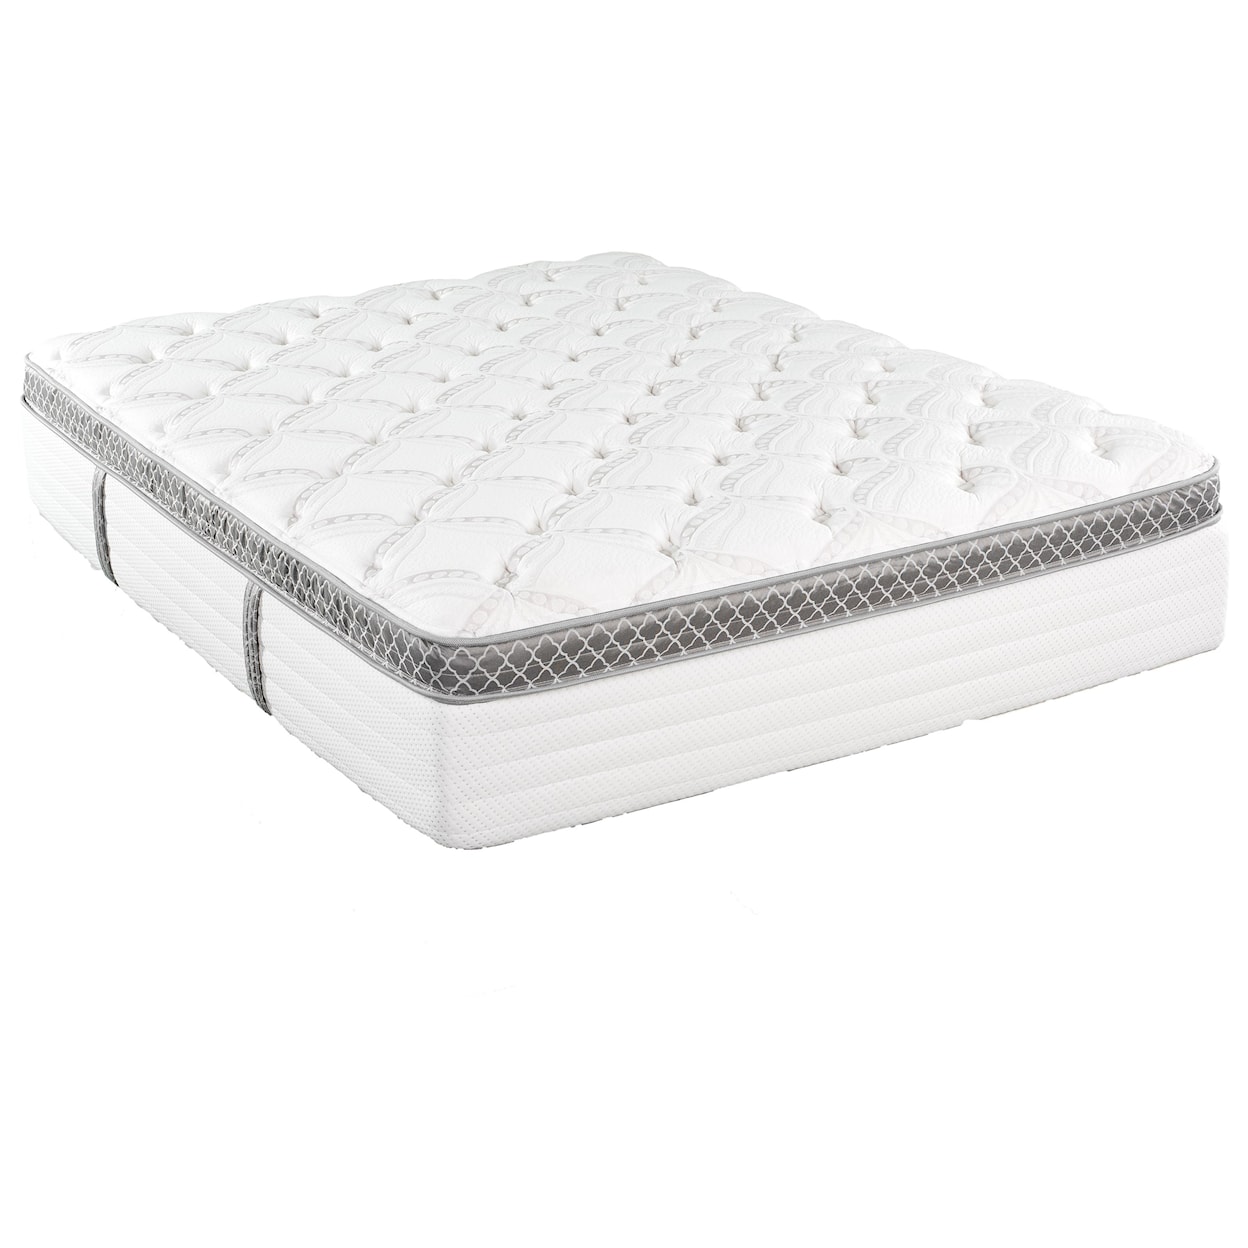 King Koil Madelyn Pillow Top Twin Pillow Top Pocketed Coil Mattress